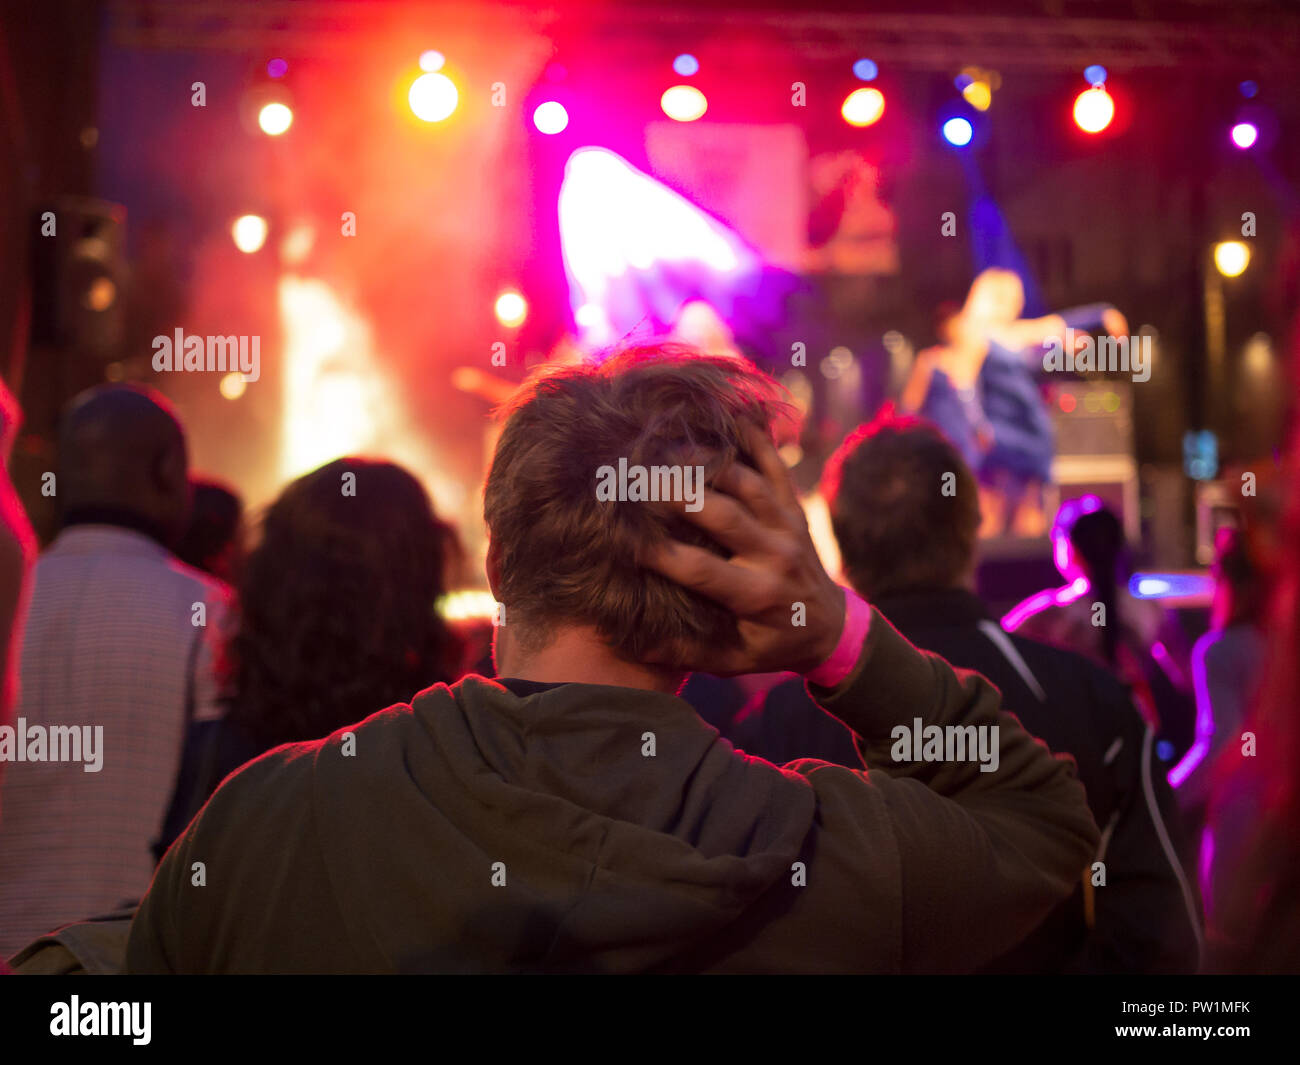 Lonely sad young man in the crowd watching a concert, hand on head. Stock Photo